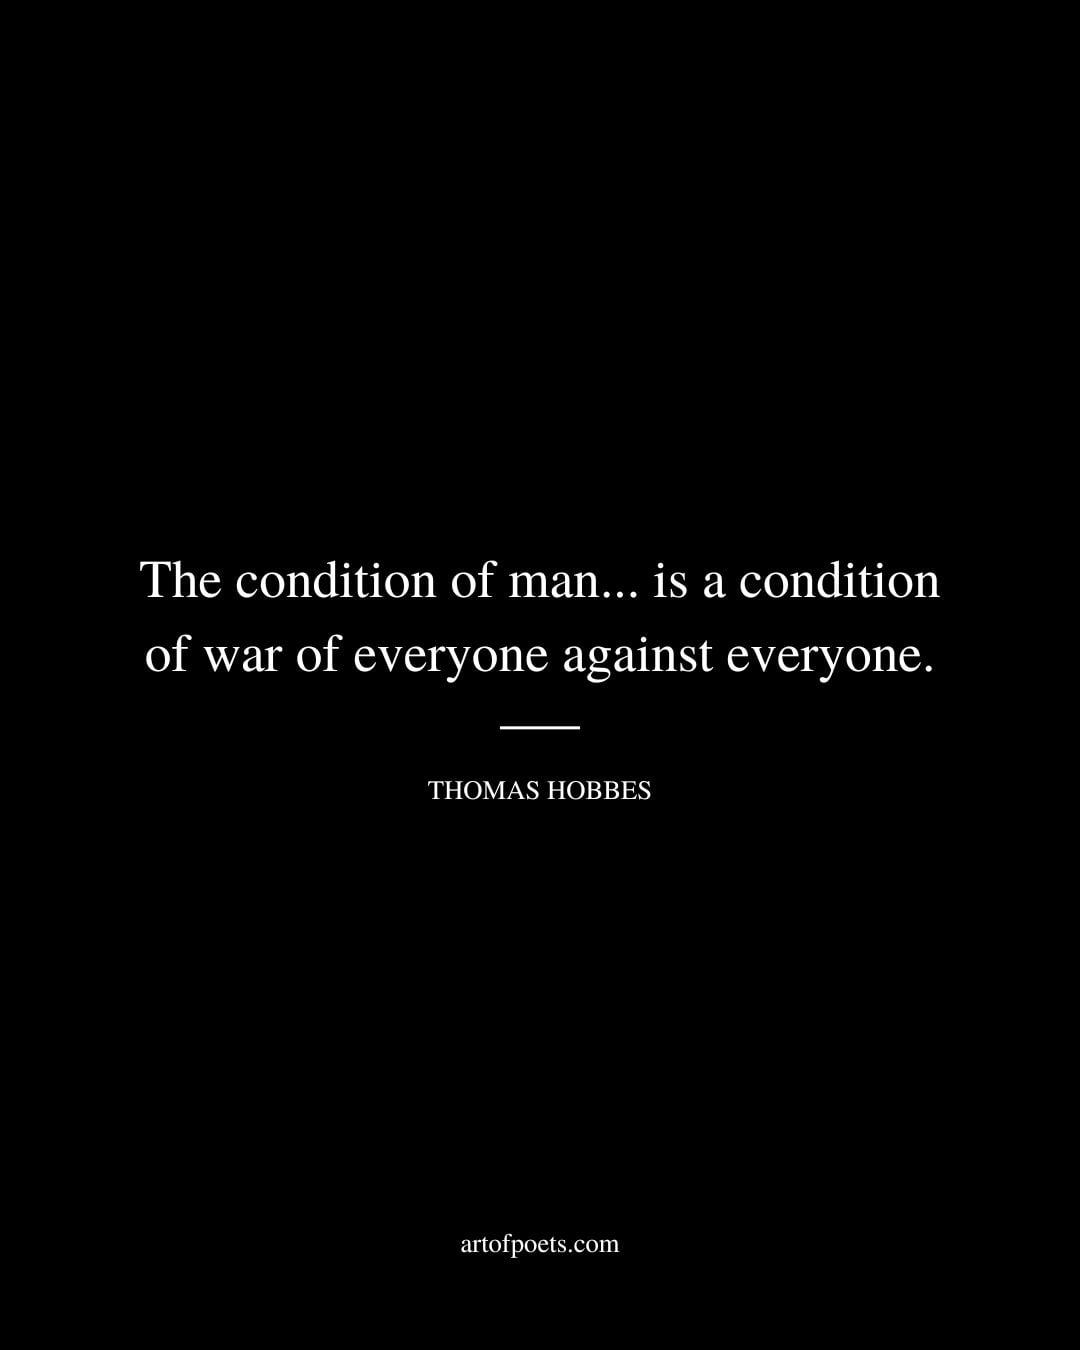 The condition of man. is a condition of war of everyone against everyone